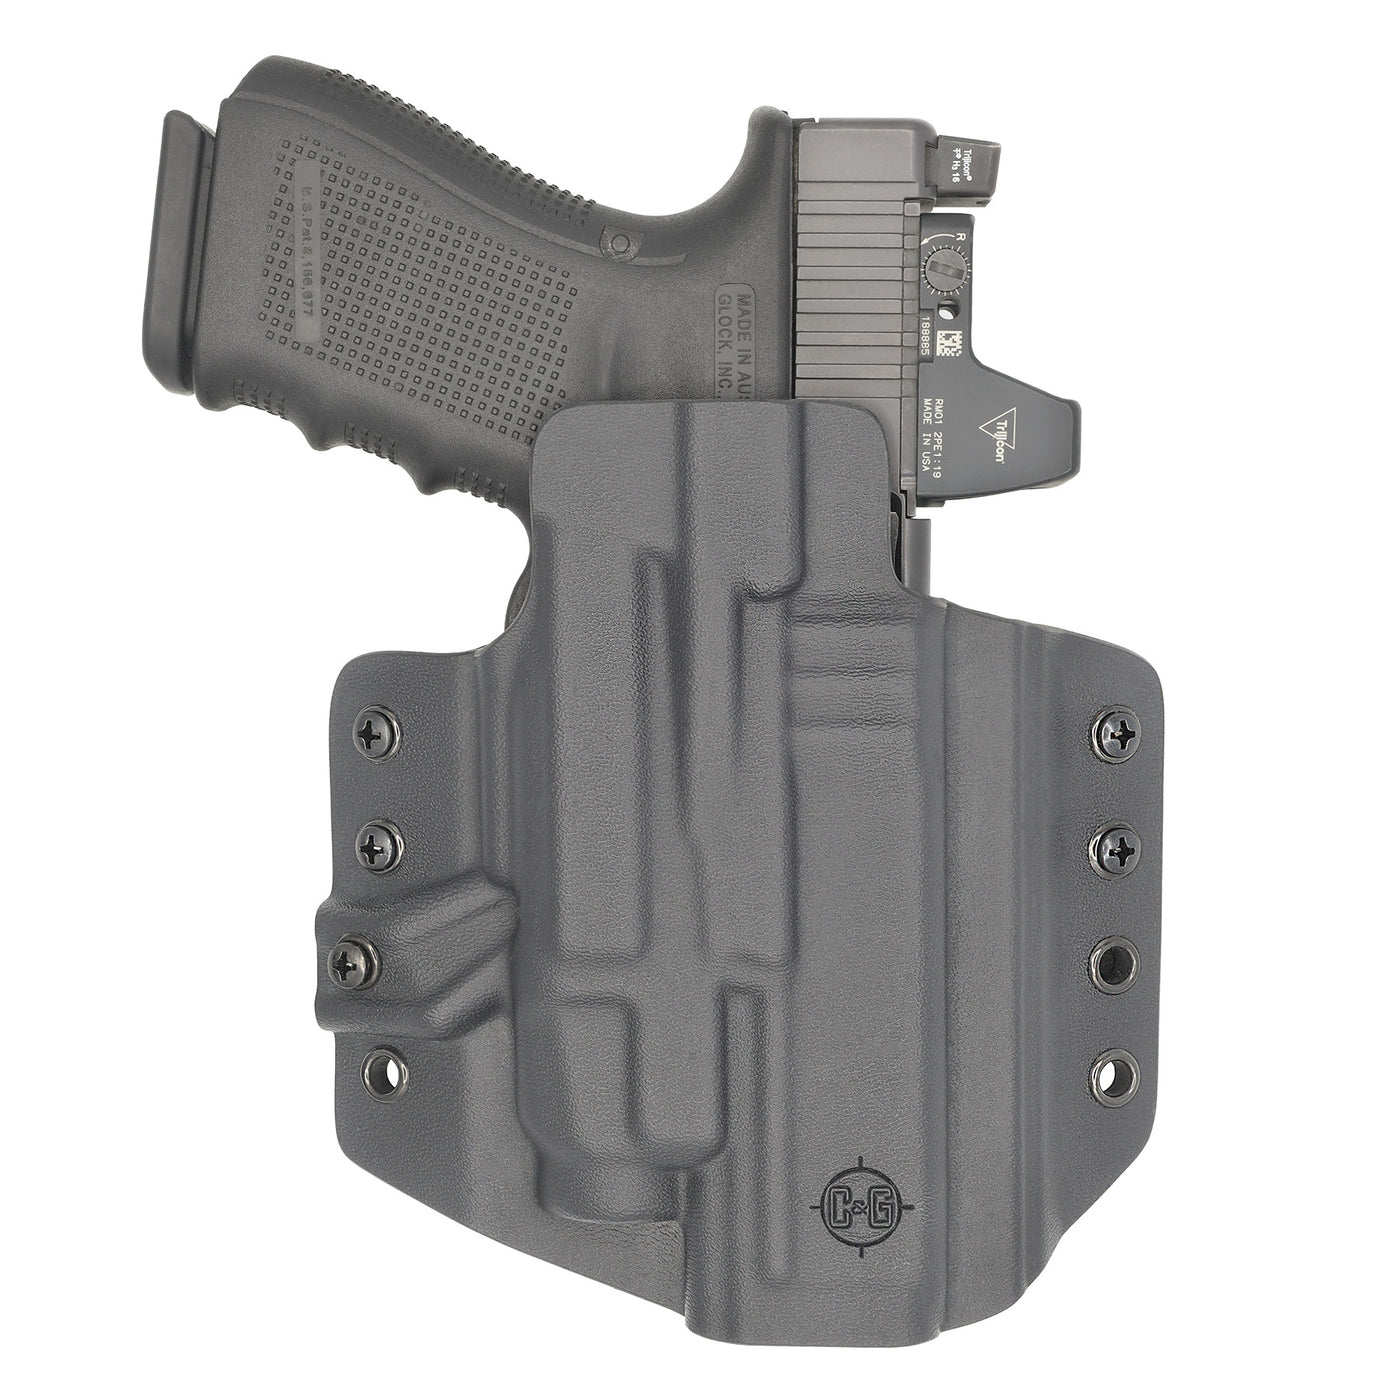 C&G Holsters quickship OWB Tactical Glock 29/30 streamlight TLR7/a in holstered position